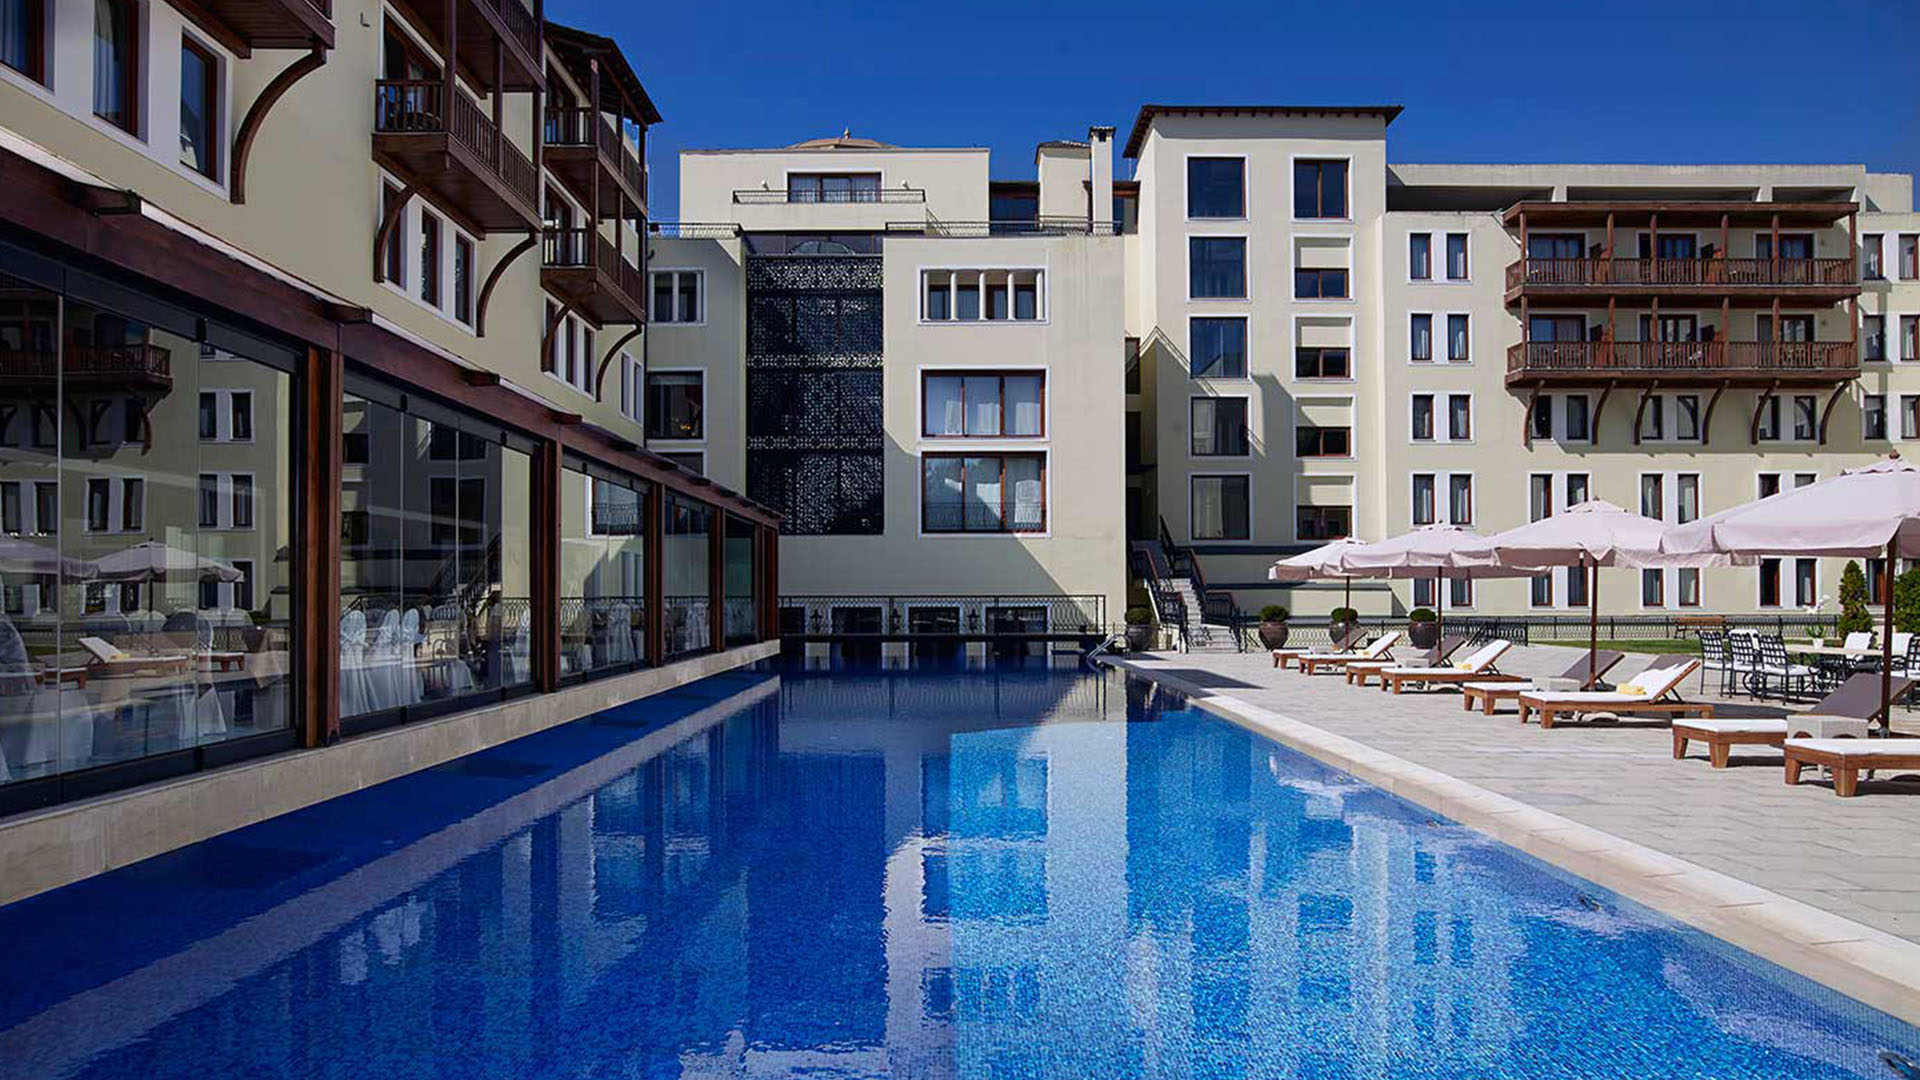 5* Grand Serai Hotel - Ιωάννινα ✦ -50% ✦ 3 Ημέρες (2 Διανυκτερεύσεις) ✦ 2 άτομα + 2 παιδιά έως 6 ετών ✦ 8 ✦ 02/05/2024 έως 30/06/2024 και 01/09/2024 έως 30/09/2024 ✦ <strong>Early check in και Late check out κατόπιν διαθεσιμότητας!</strong>